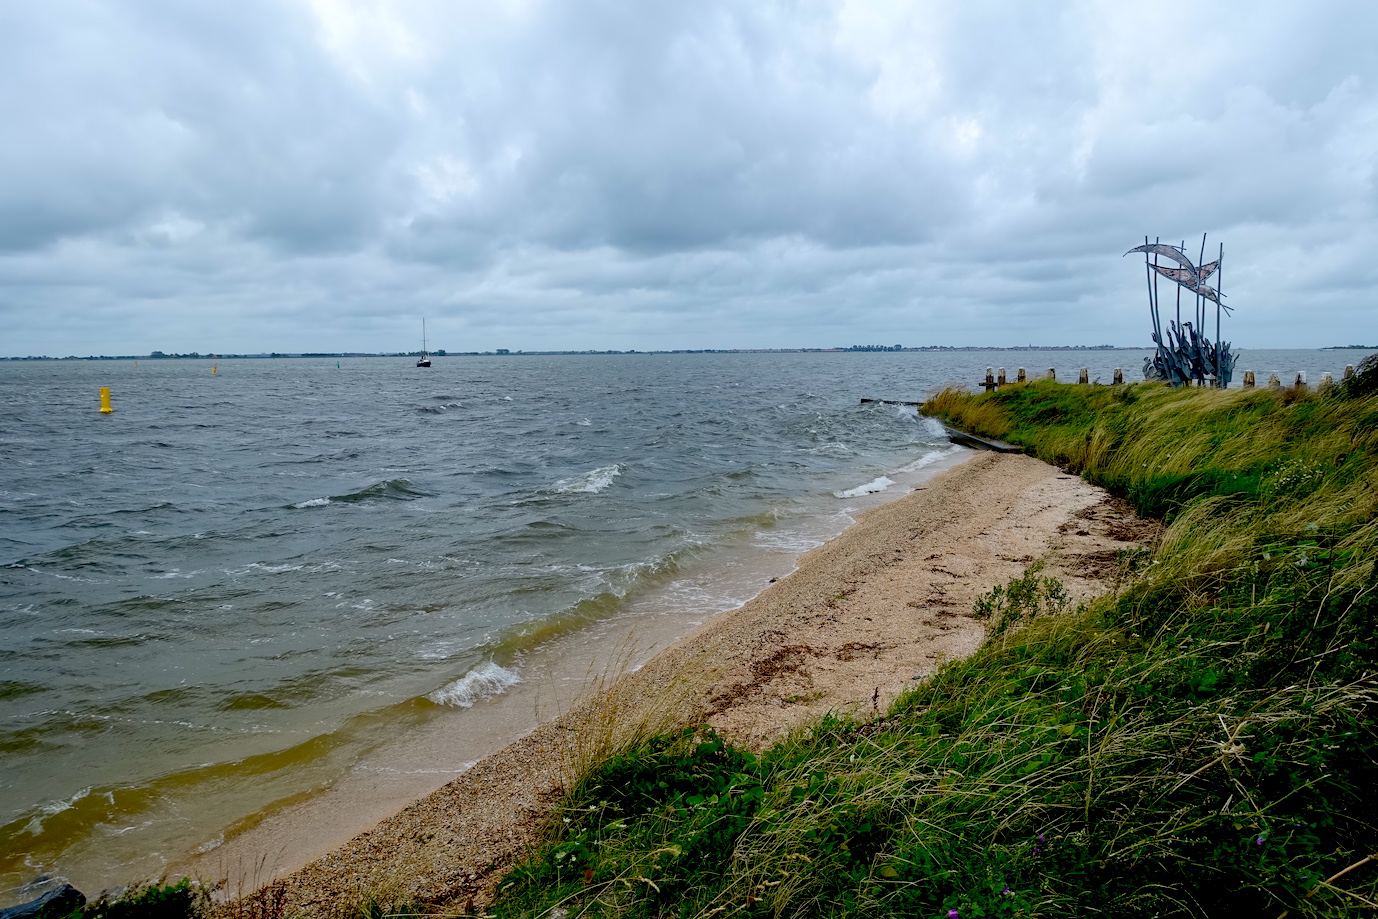 A view of the Marken beach close to the harbor and an art sculpture